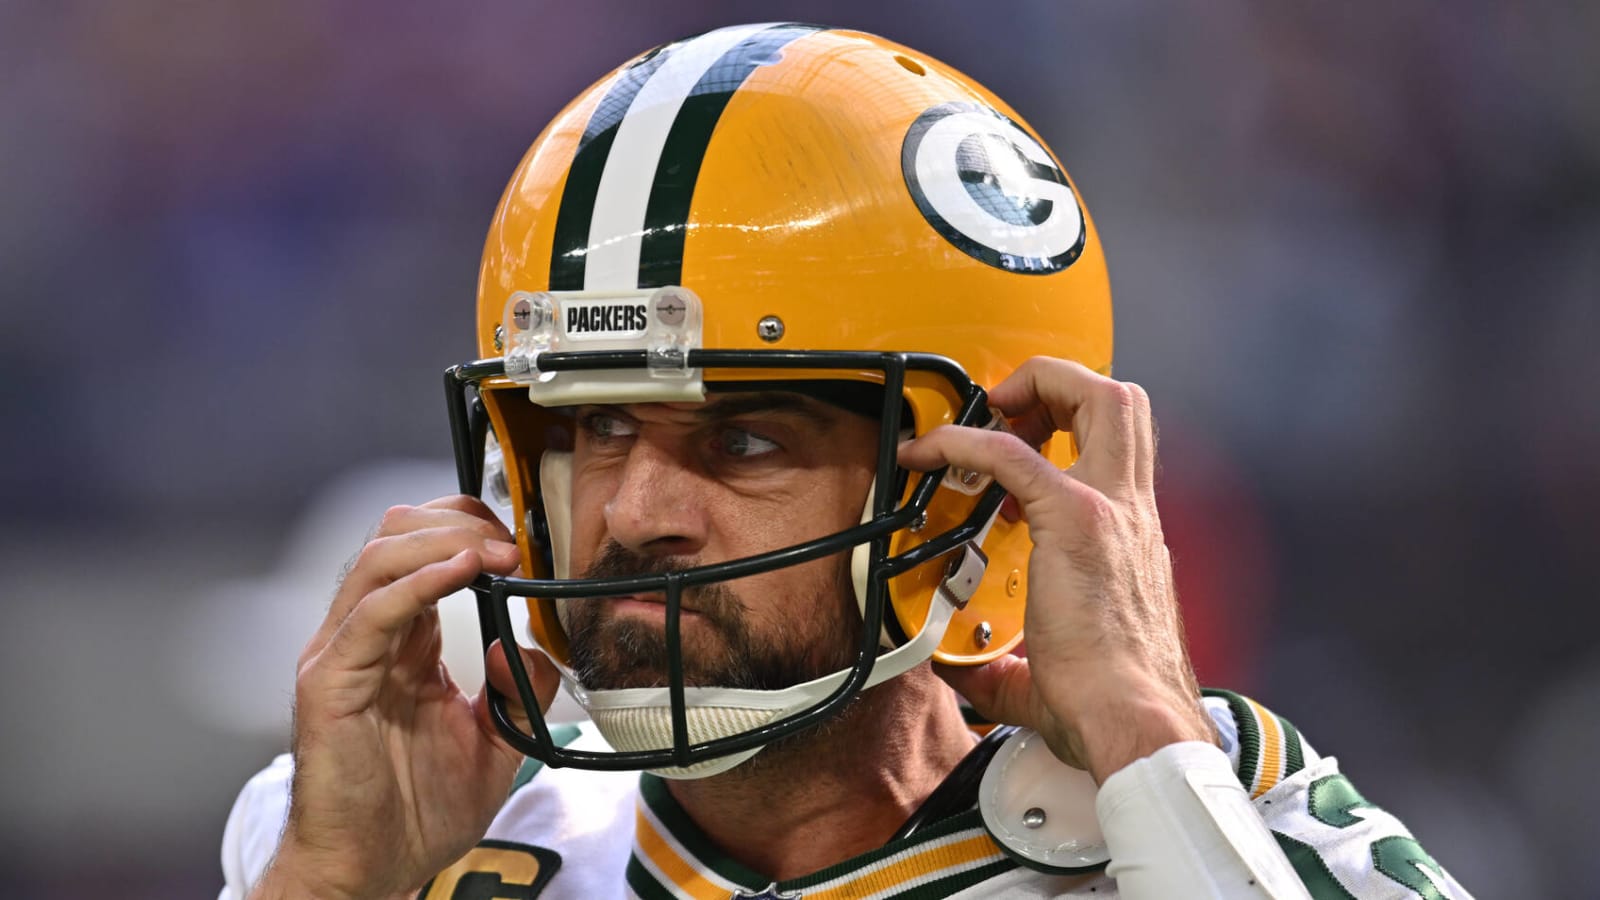 Are the Packers mentally ready following Week 1 loss?